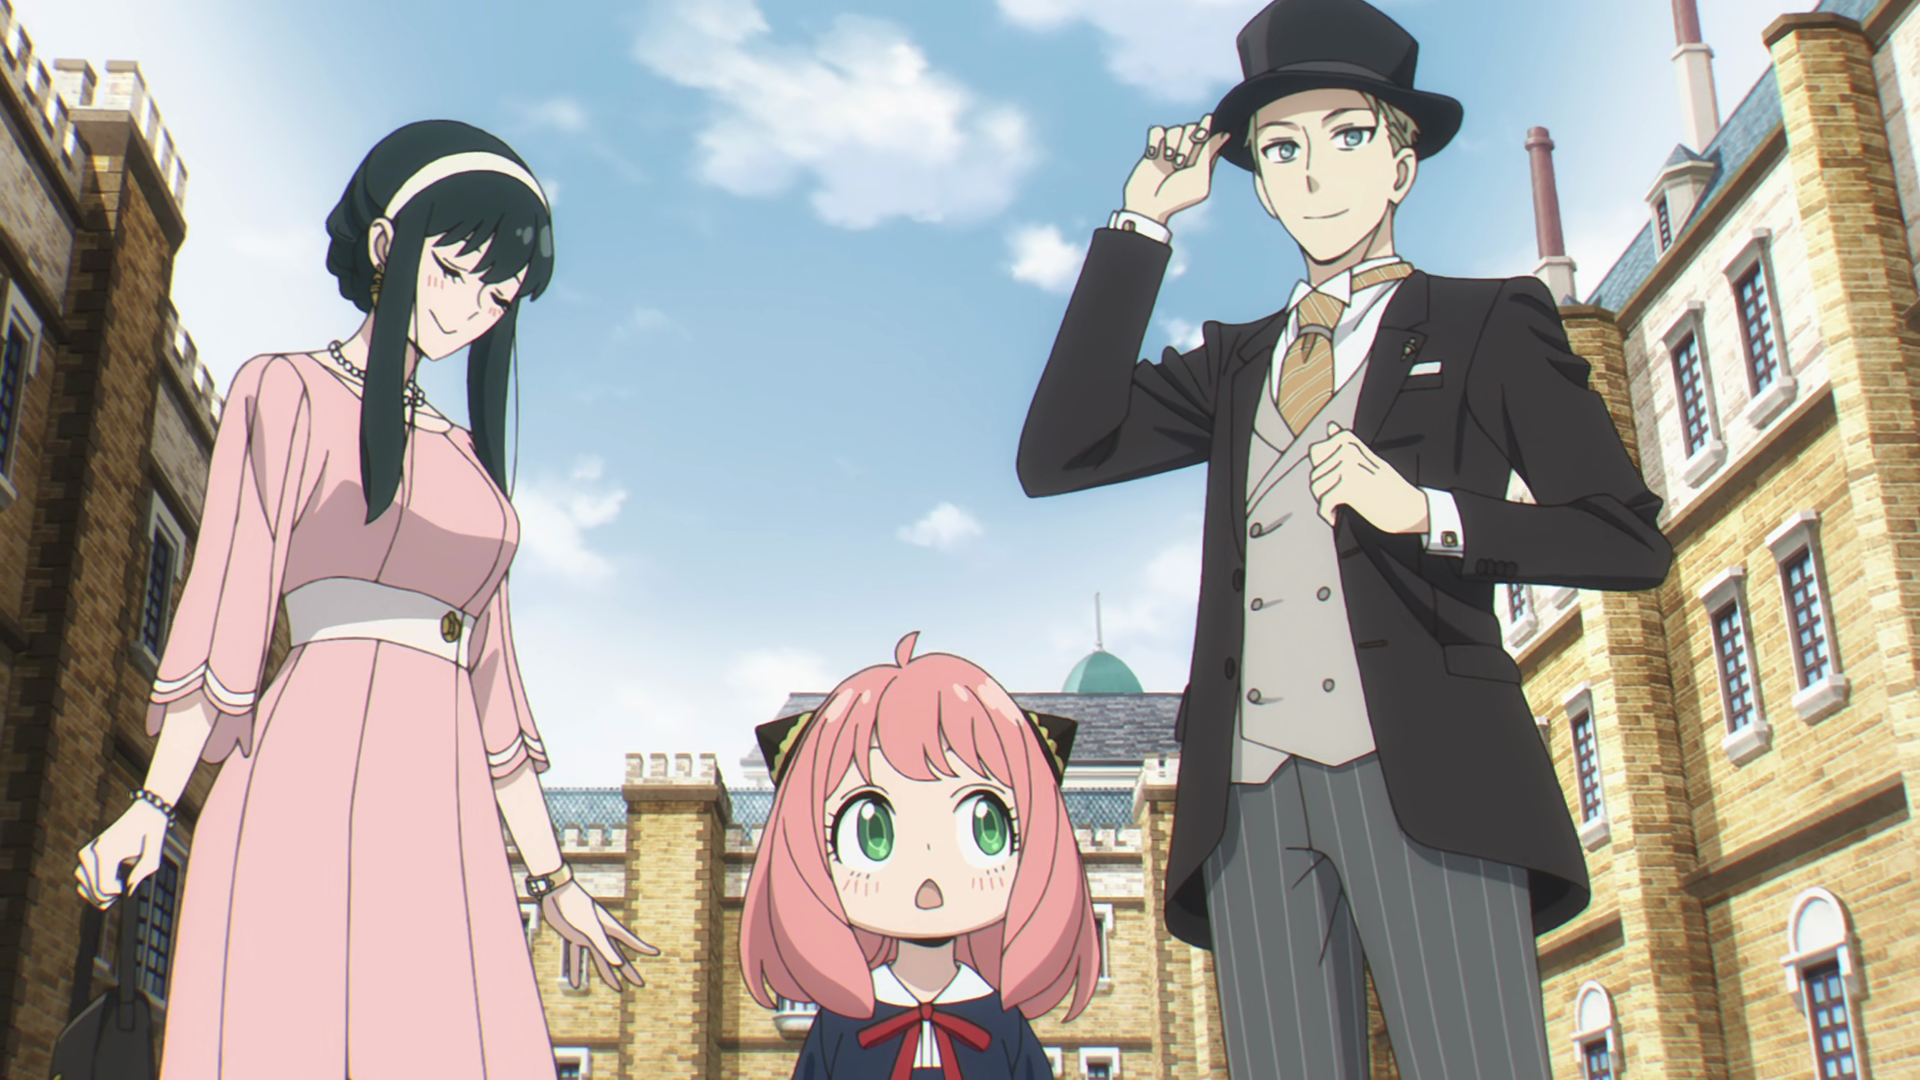 Spy x Family Episode 4 - What It Means To Be Elegant - Anime Corner